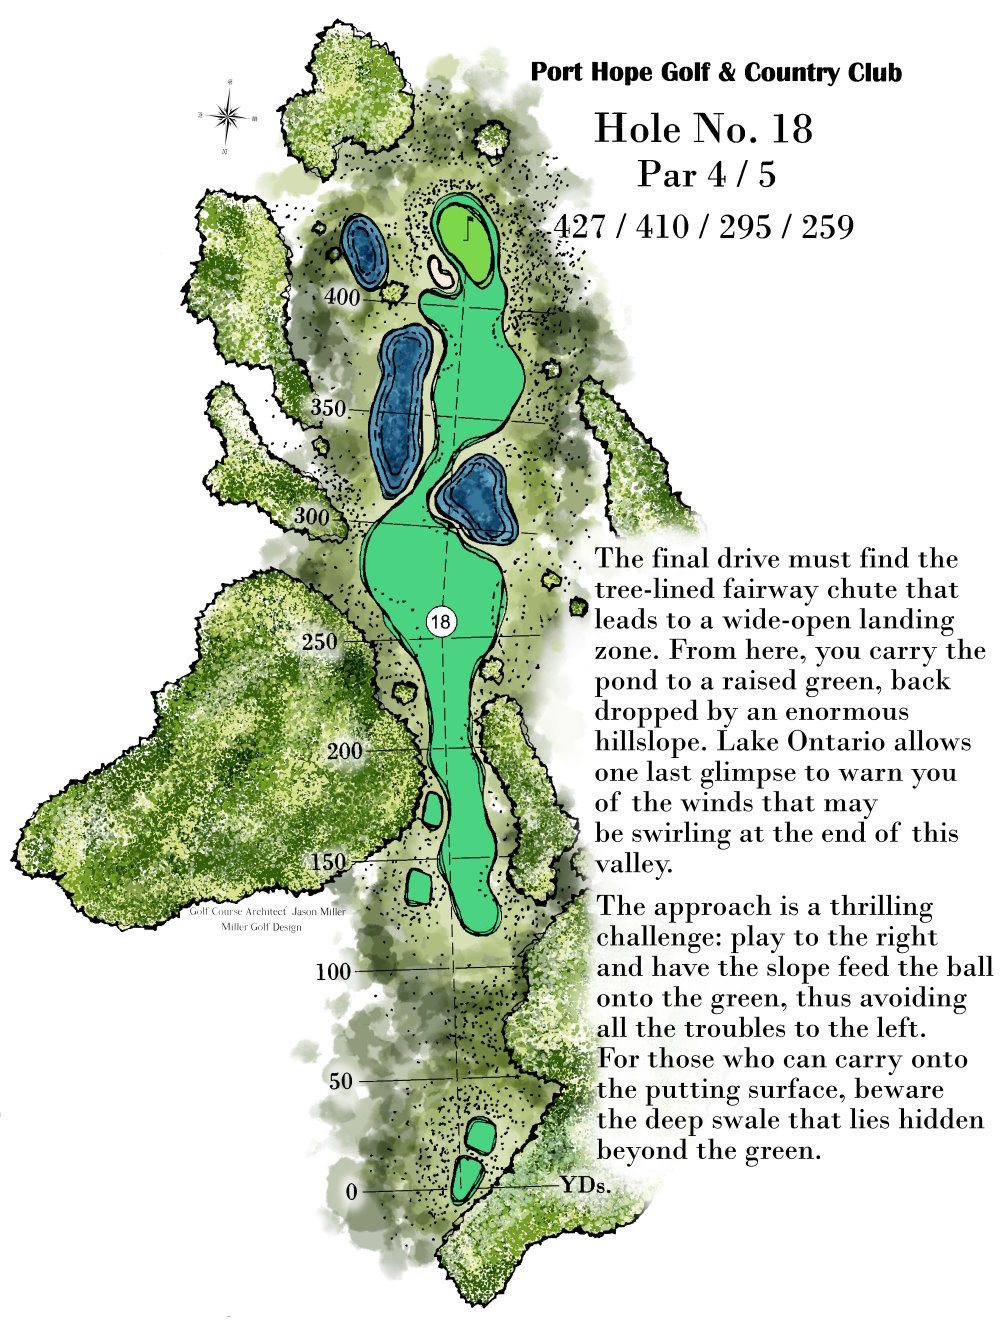 Rendering of Hole 18